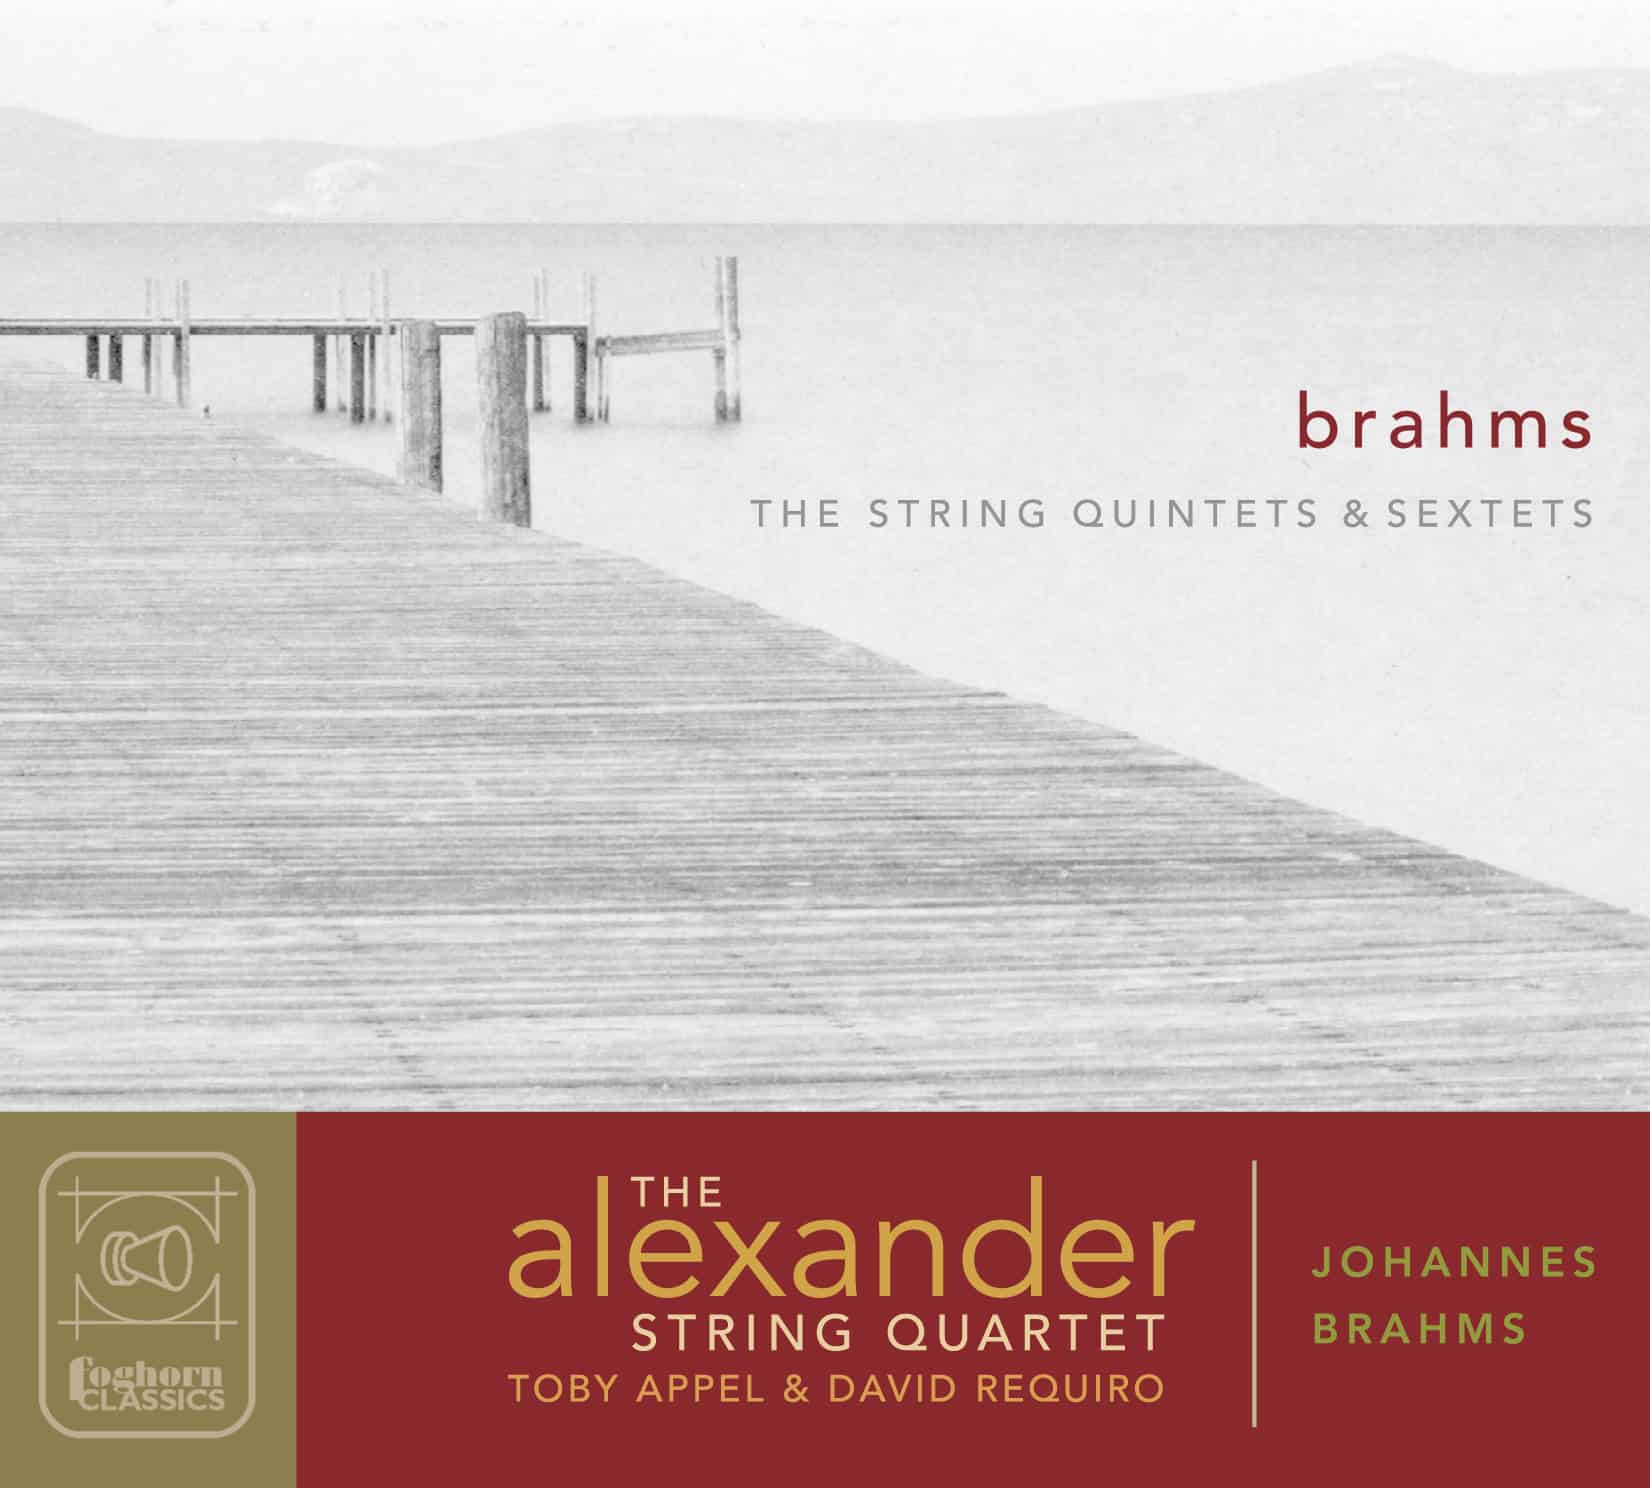 Brahms: The String Quintets and Sextets